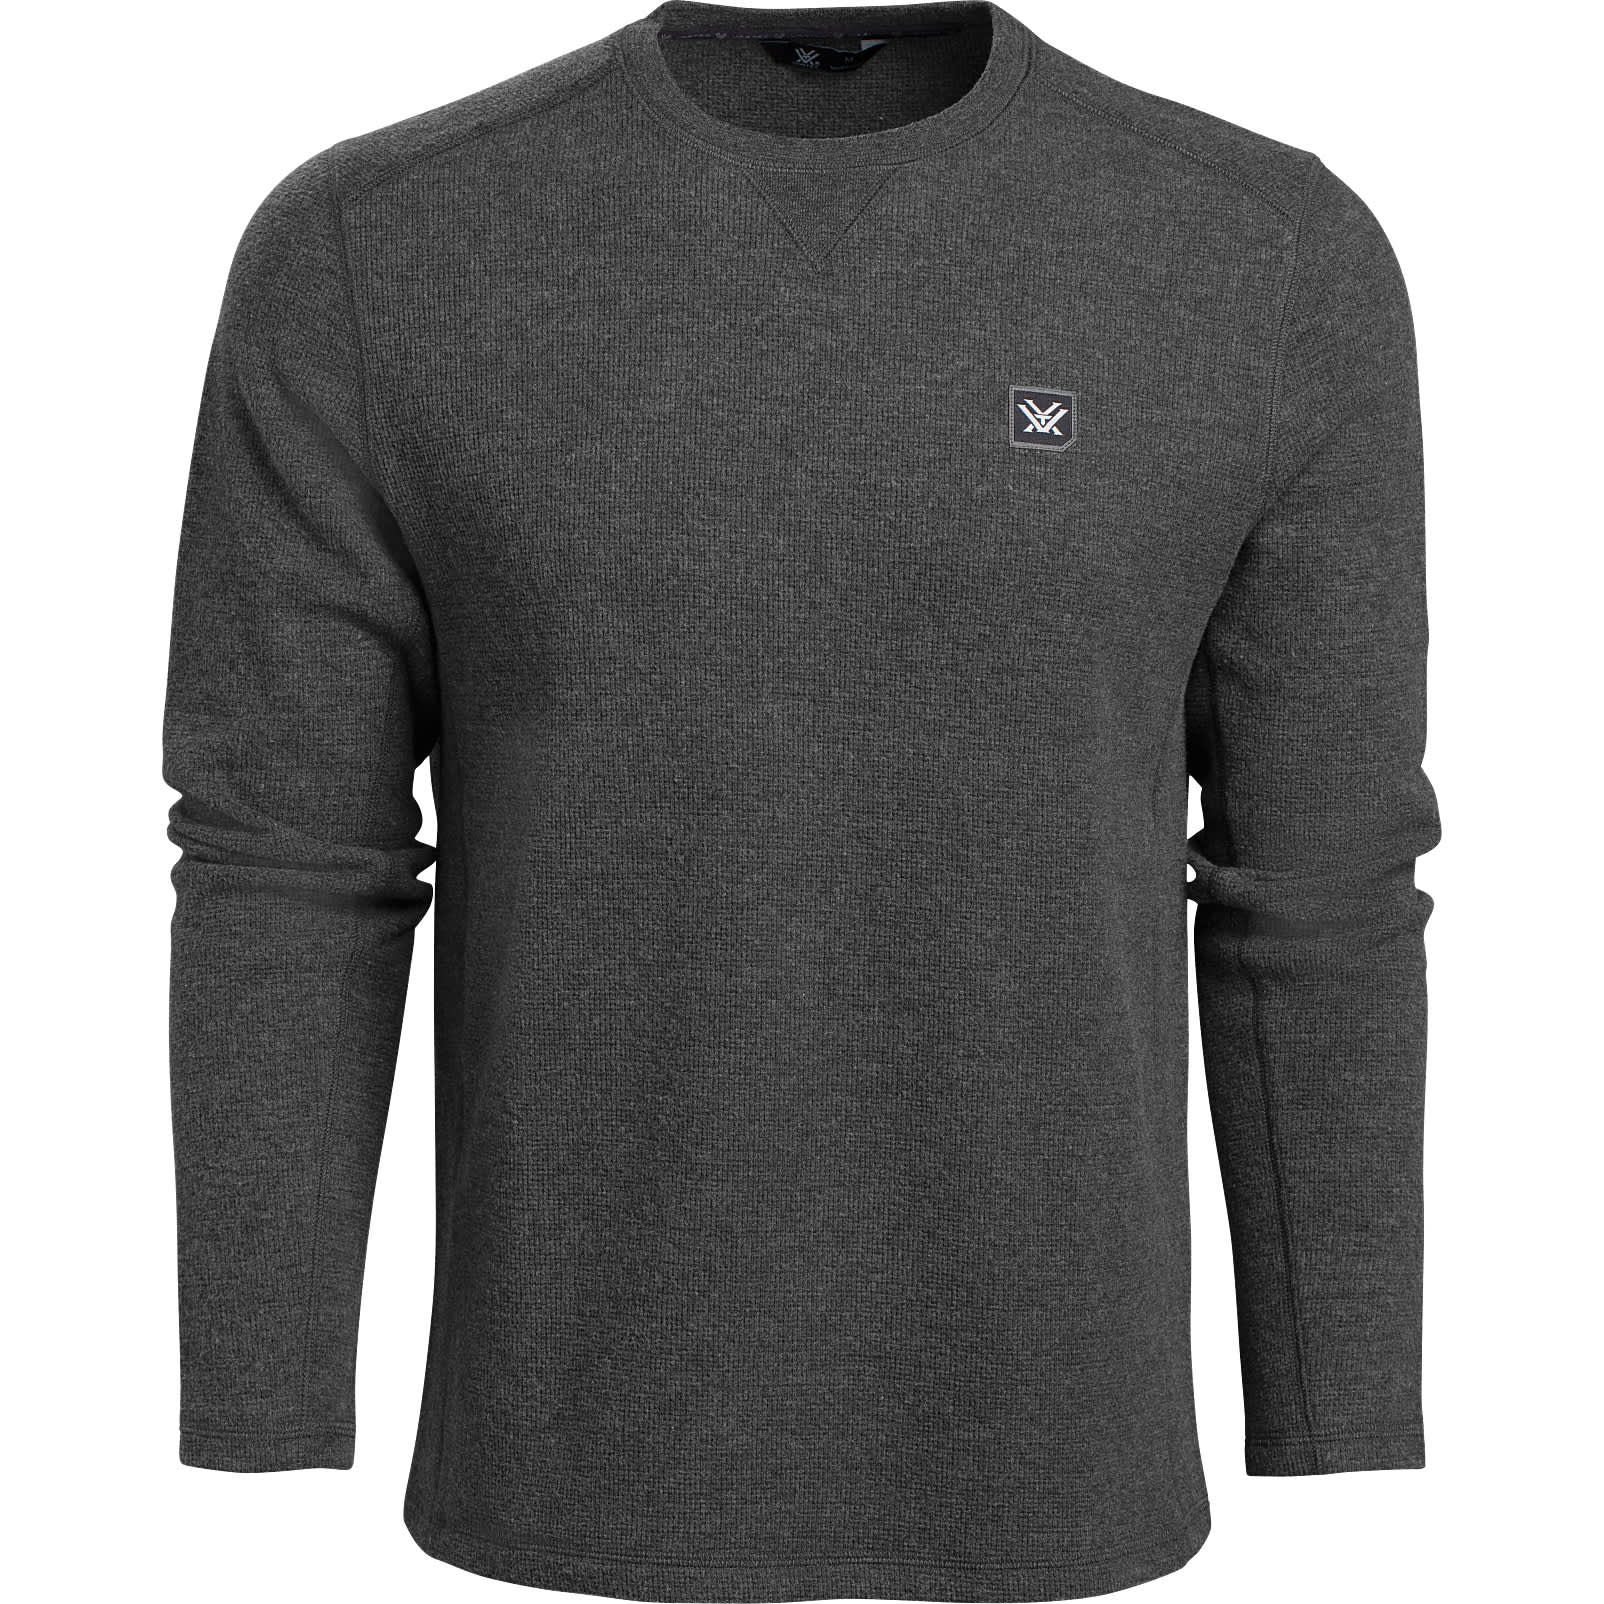 Vortex® Men’s Front Country Thermal Long-Sleeve Top